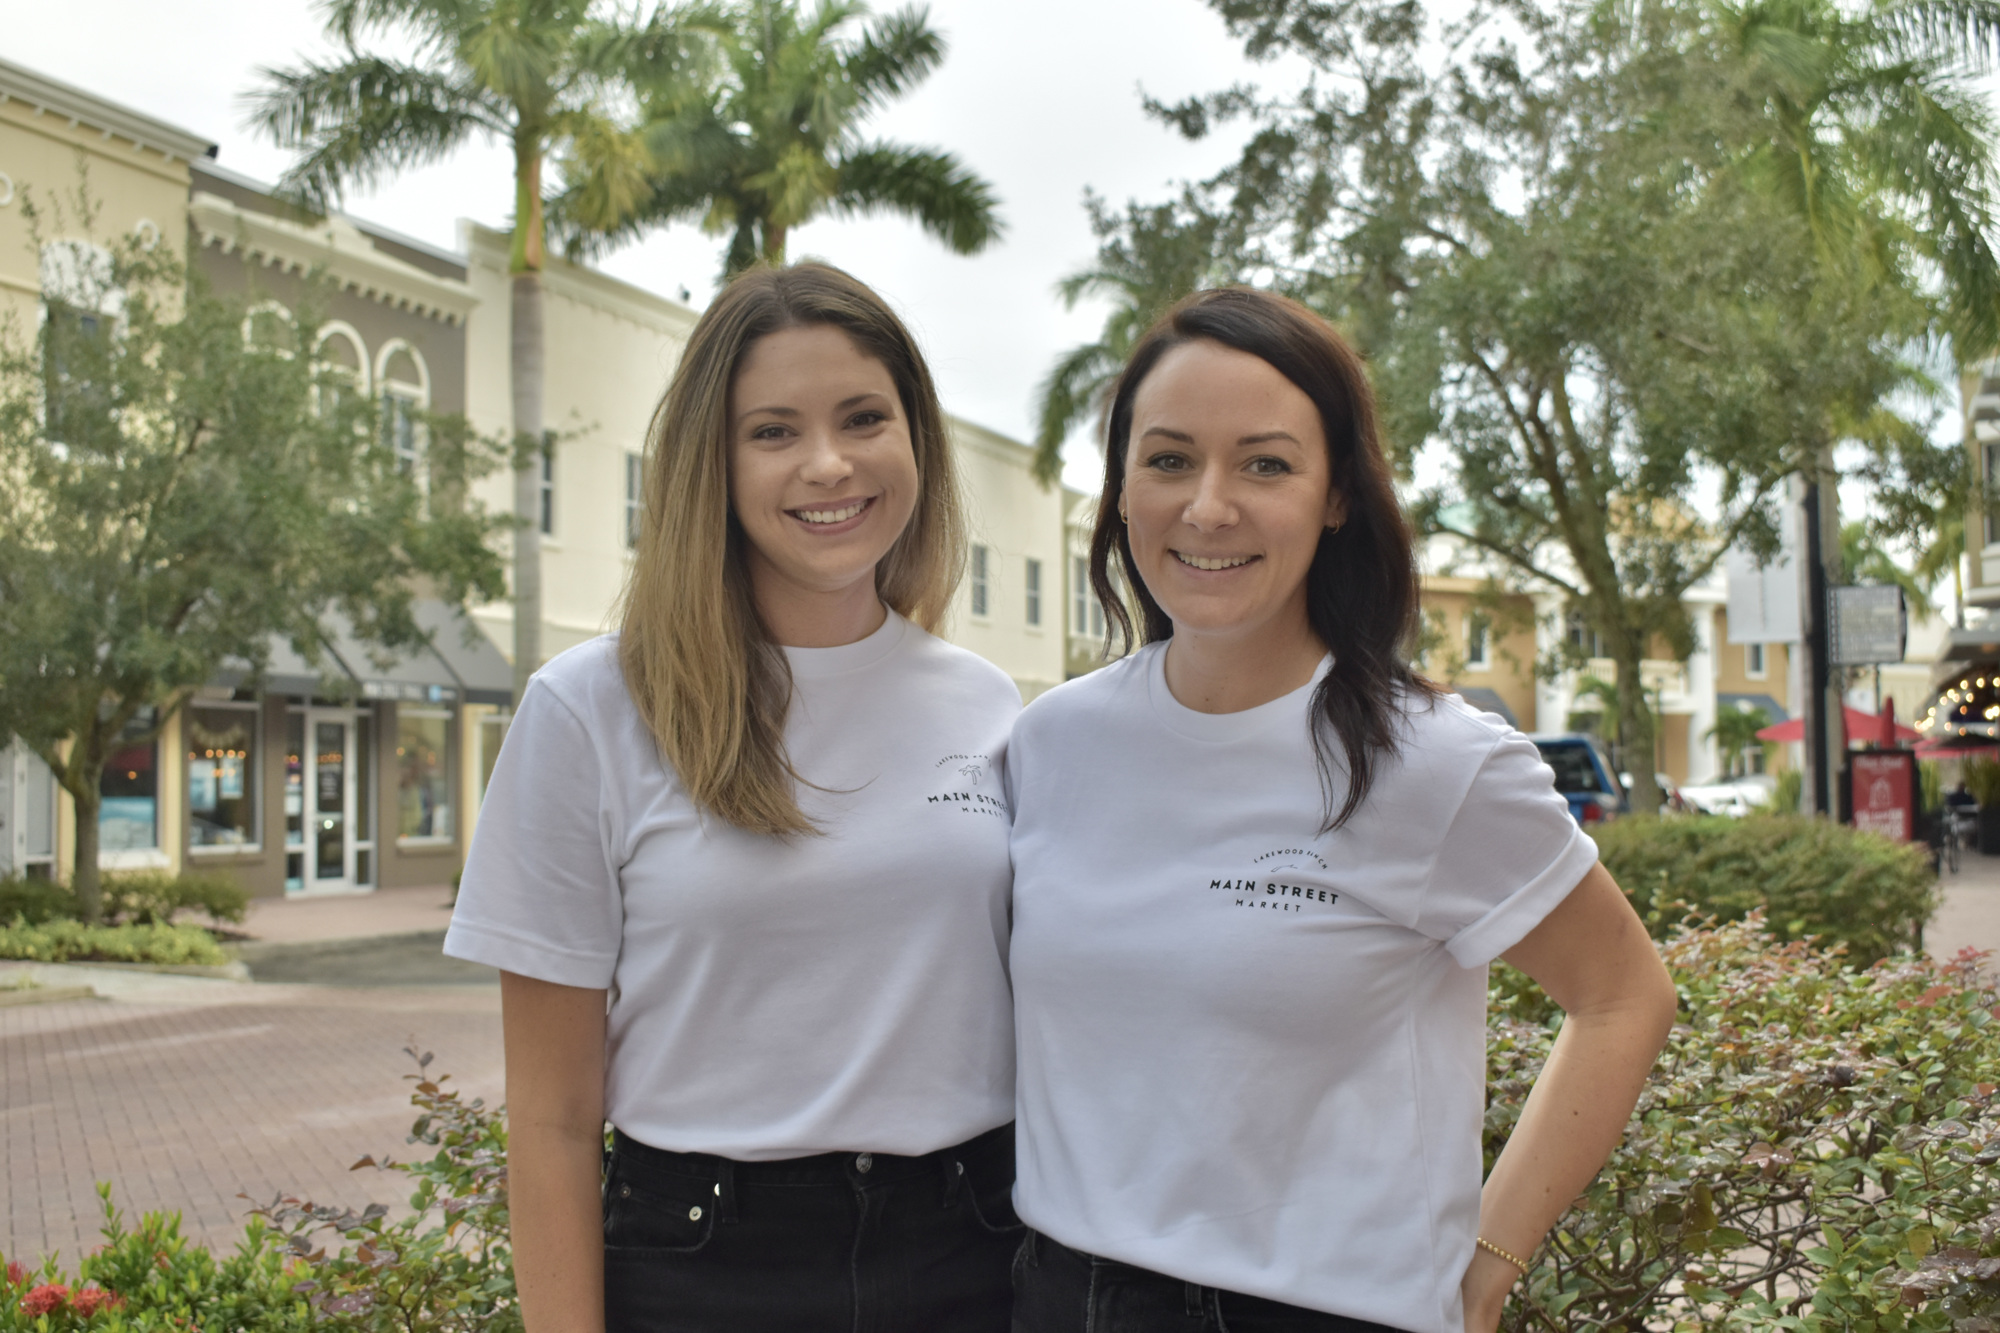 Lindsay Wood and Niki Dalsing are managing Main Street Market. (Photo by Ian Swaby)